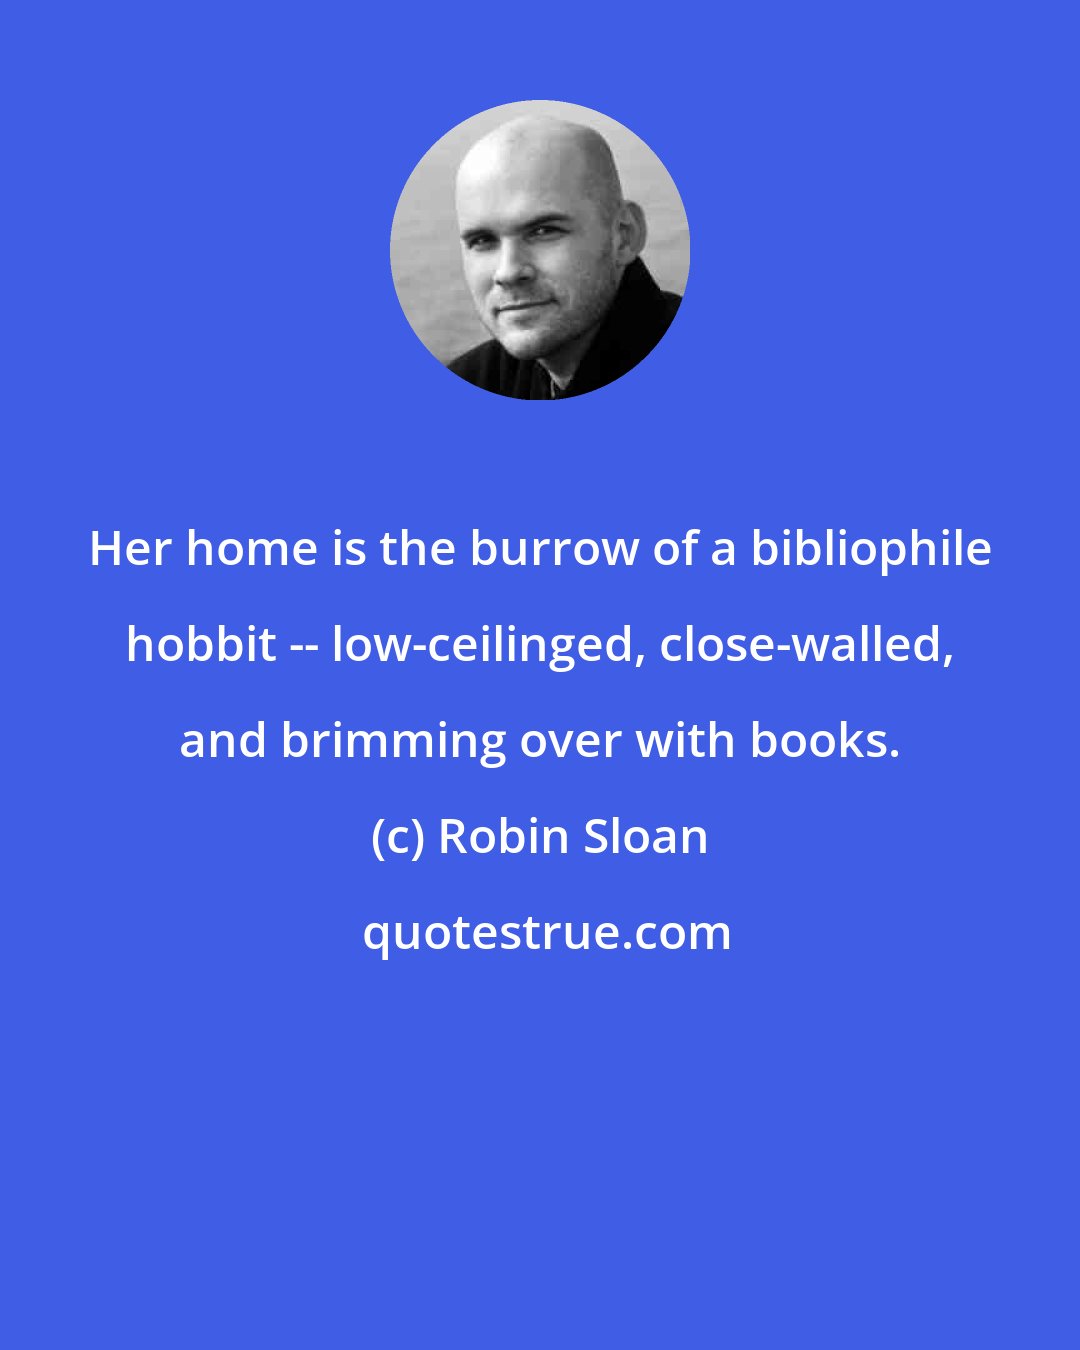 Robin Sloan: Her home is the burrow of a bibliophile hobbit -- low-ceilinged, close-walled, and brimming over with books.